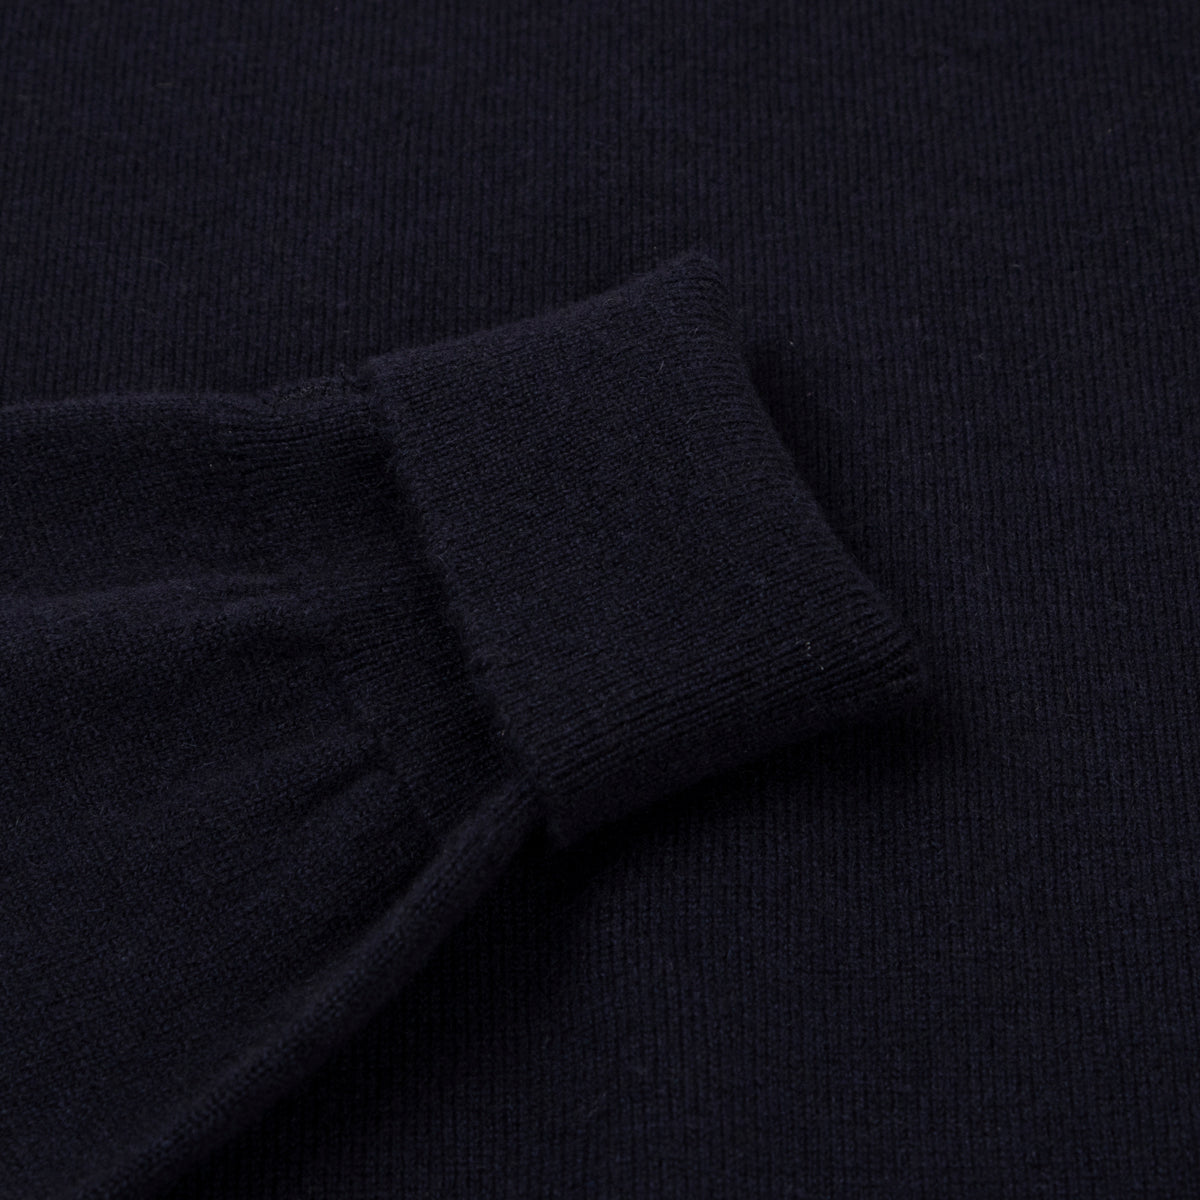 Dark Navy Oban 3 button 2ply Cashmere Polo Sweater  Robert Old   